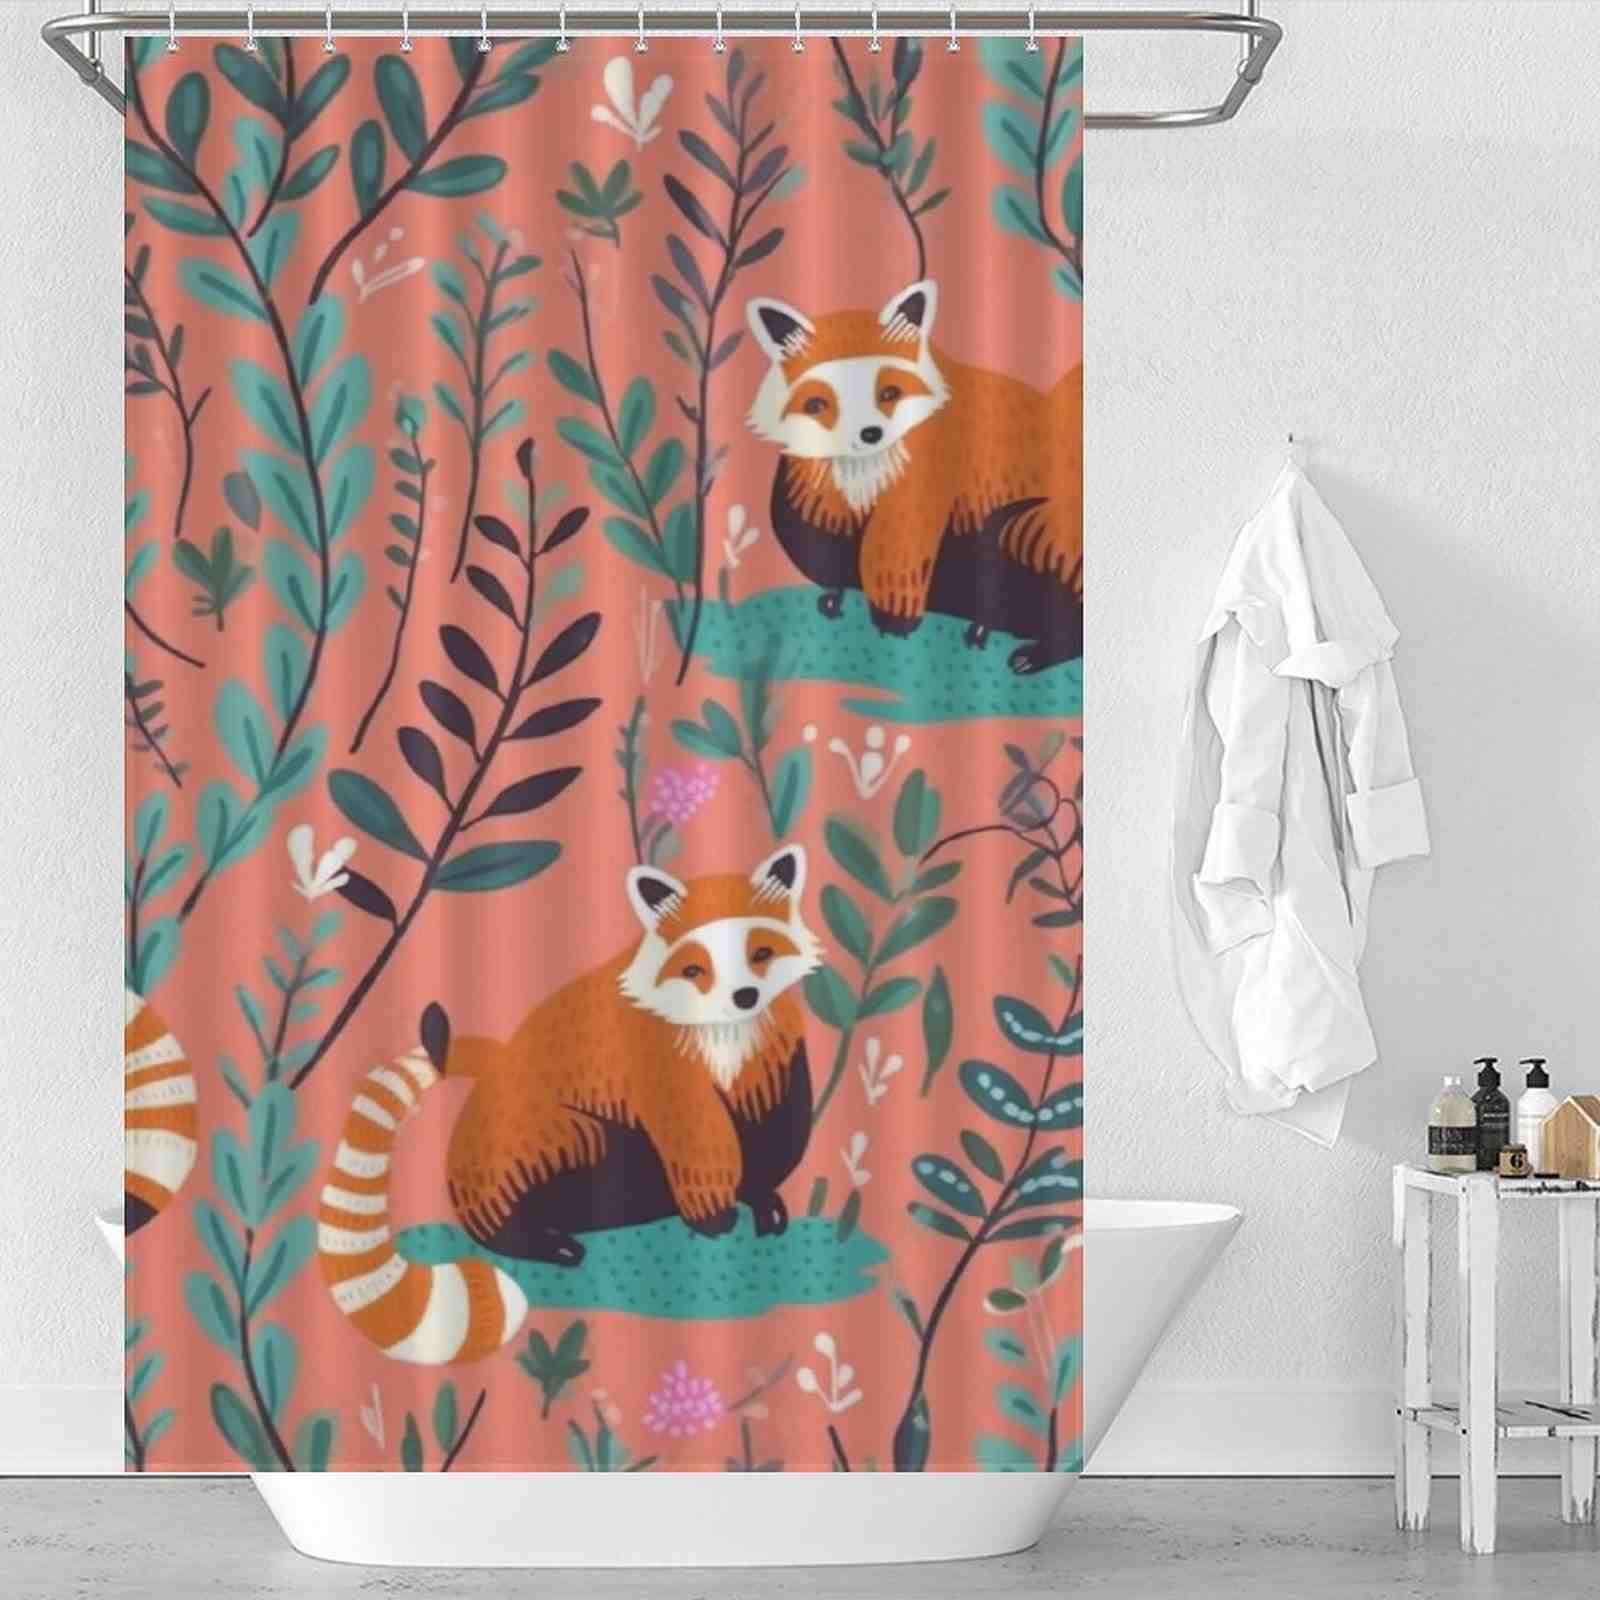 Transform your apartment bathroom with this adorable red panda shower curtain.